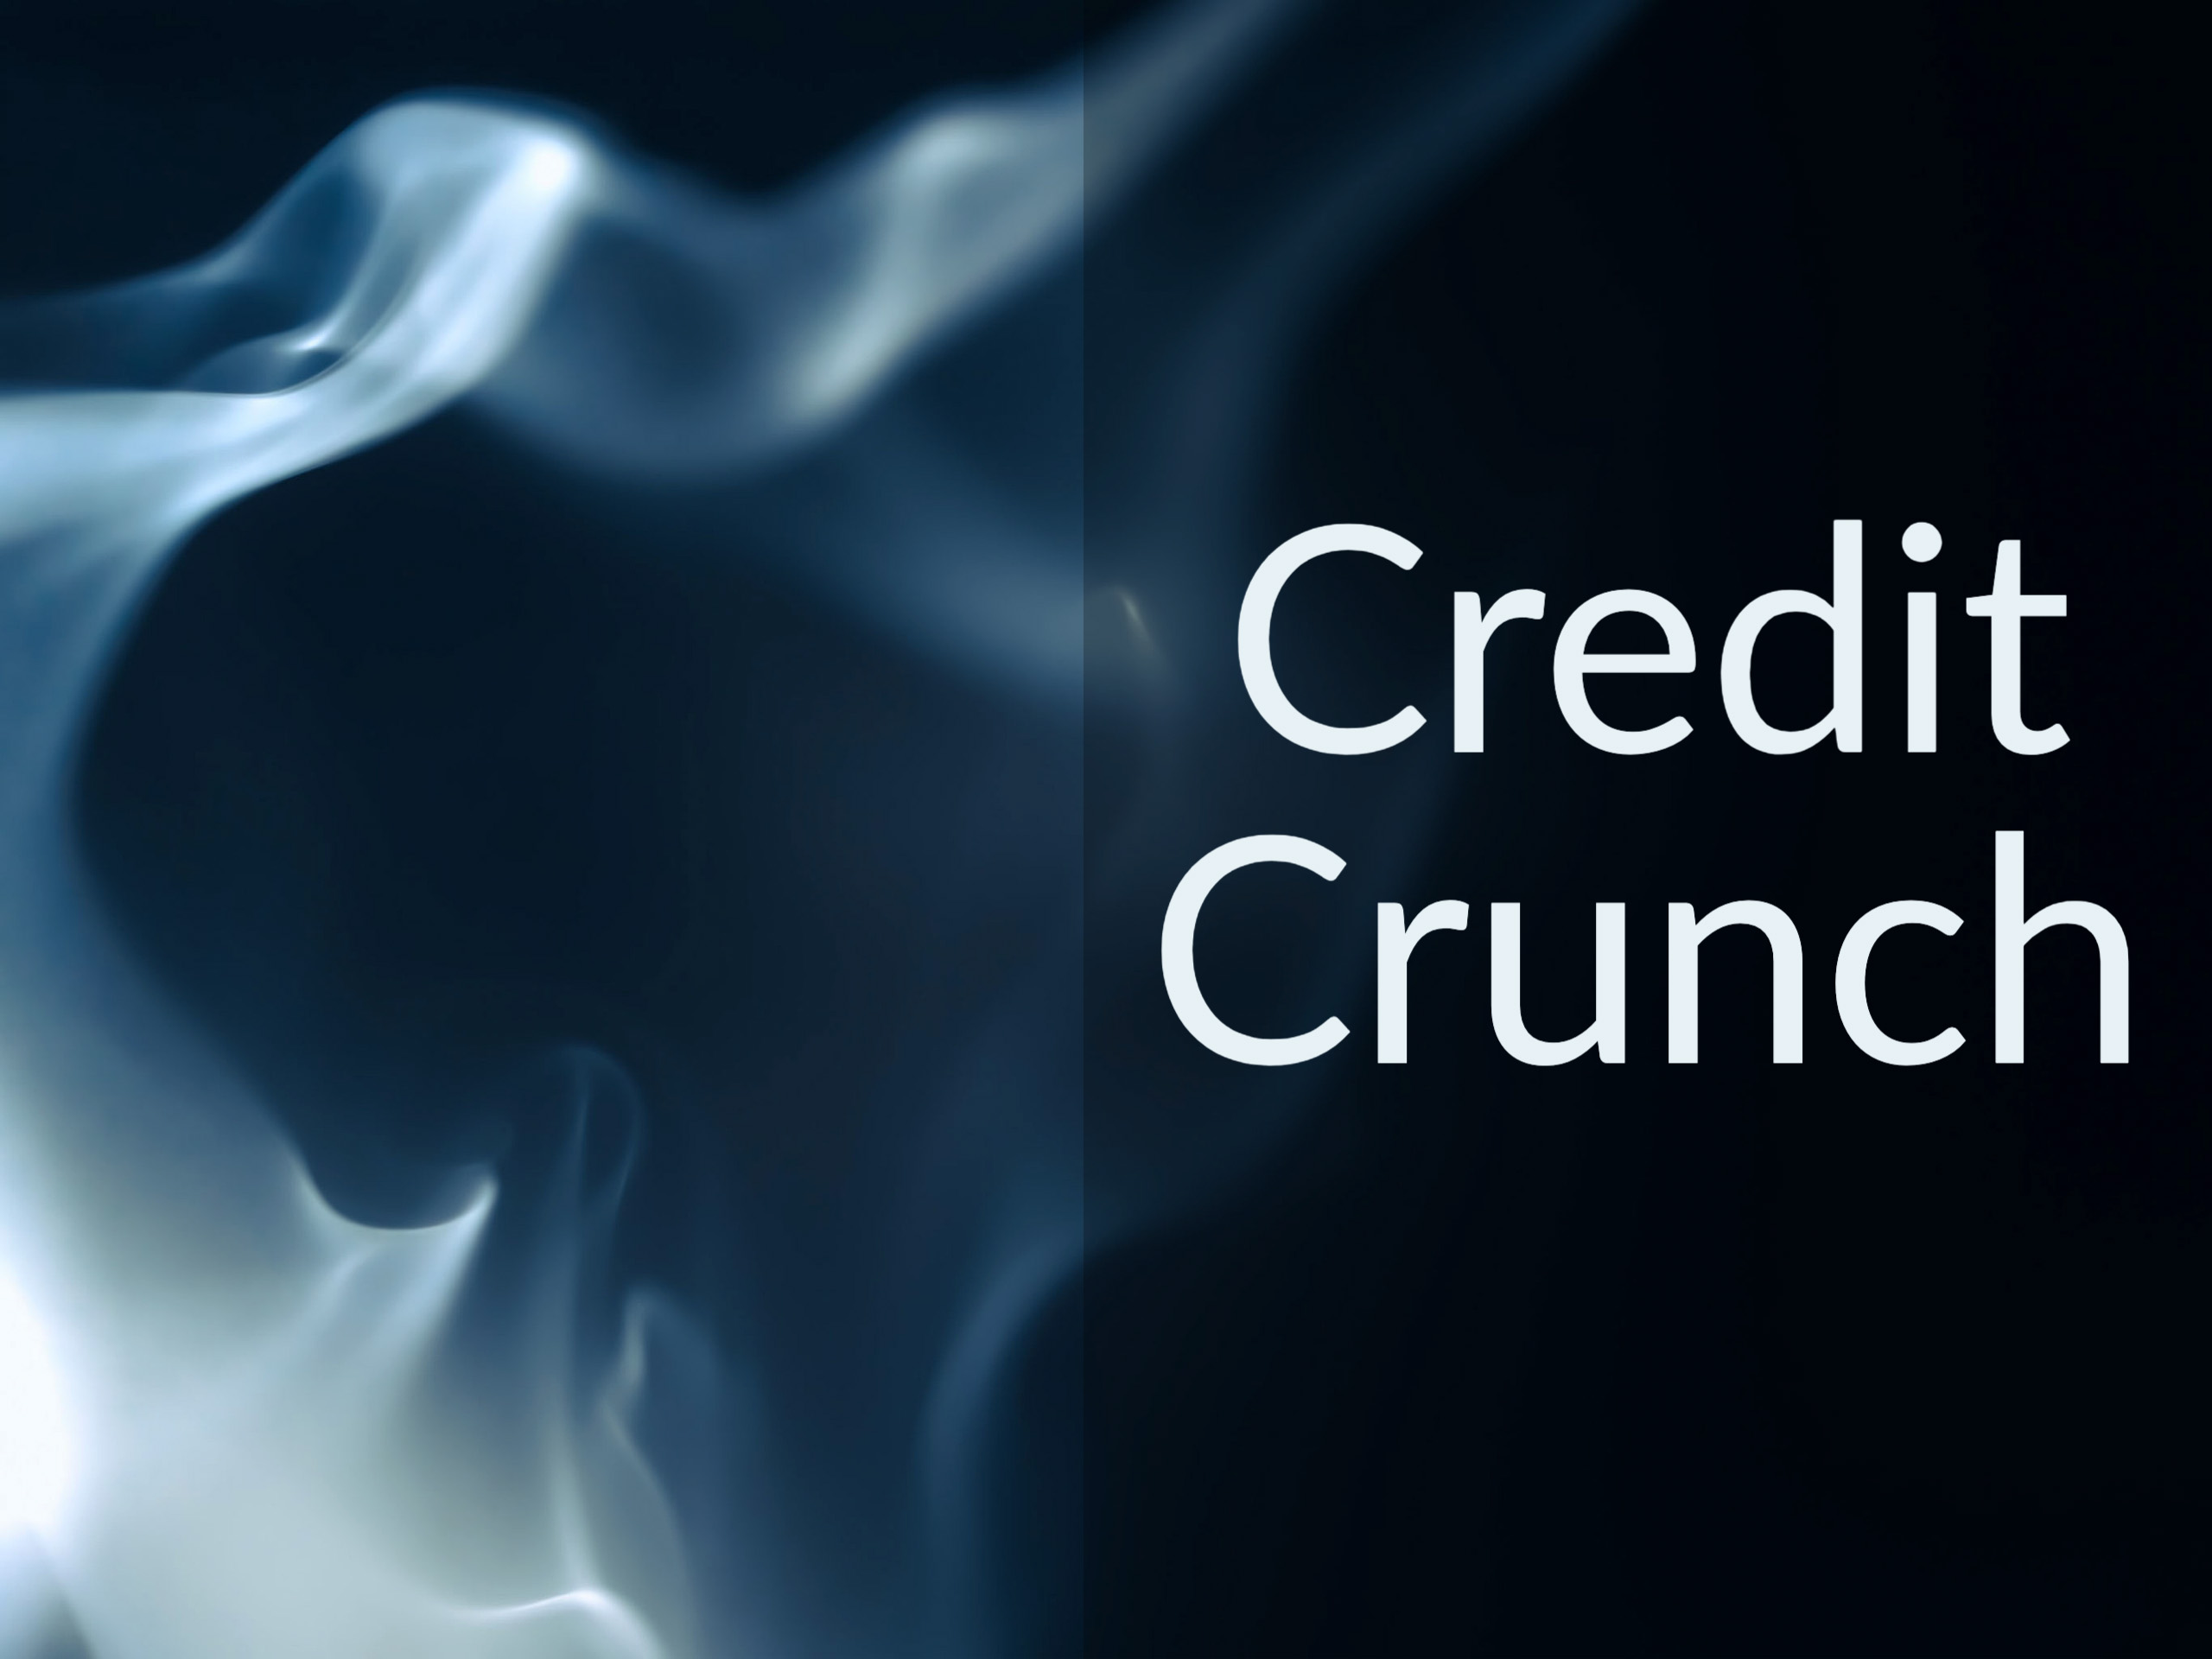 428: How the Coming Credit Crunch Could Harm the Economy and Real Estate Prices